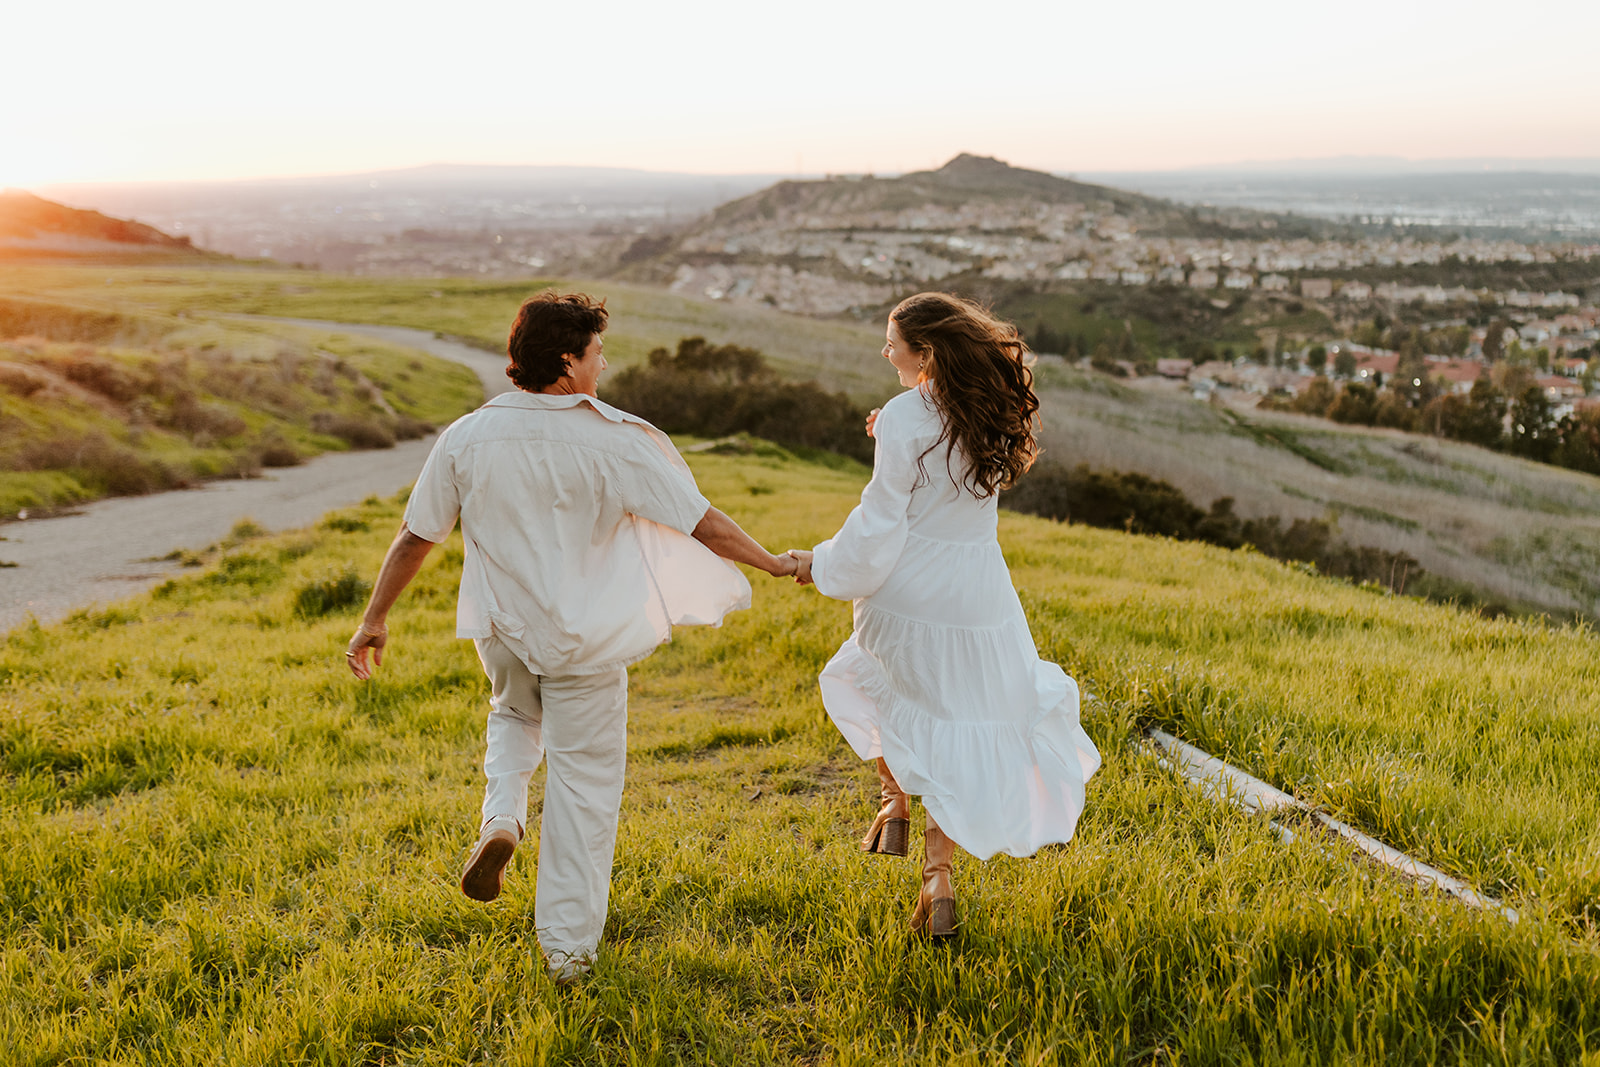 A couple in linen clothes runs together at sunset through the California hills.